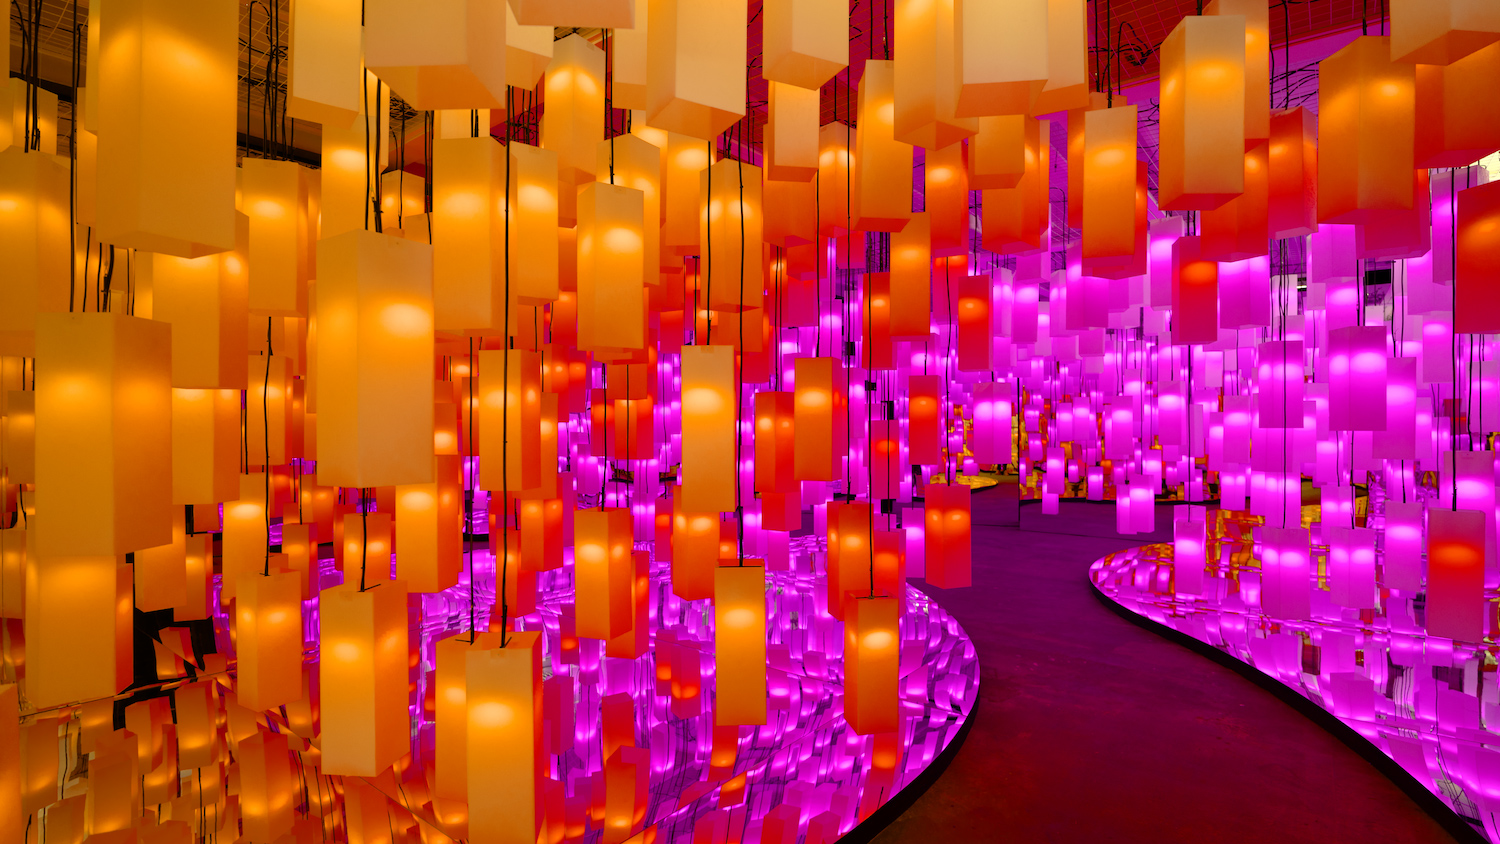 Installation view of '631' features flickering candles and vibrant cerise neon lights